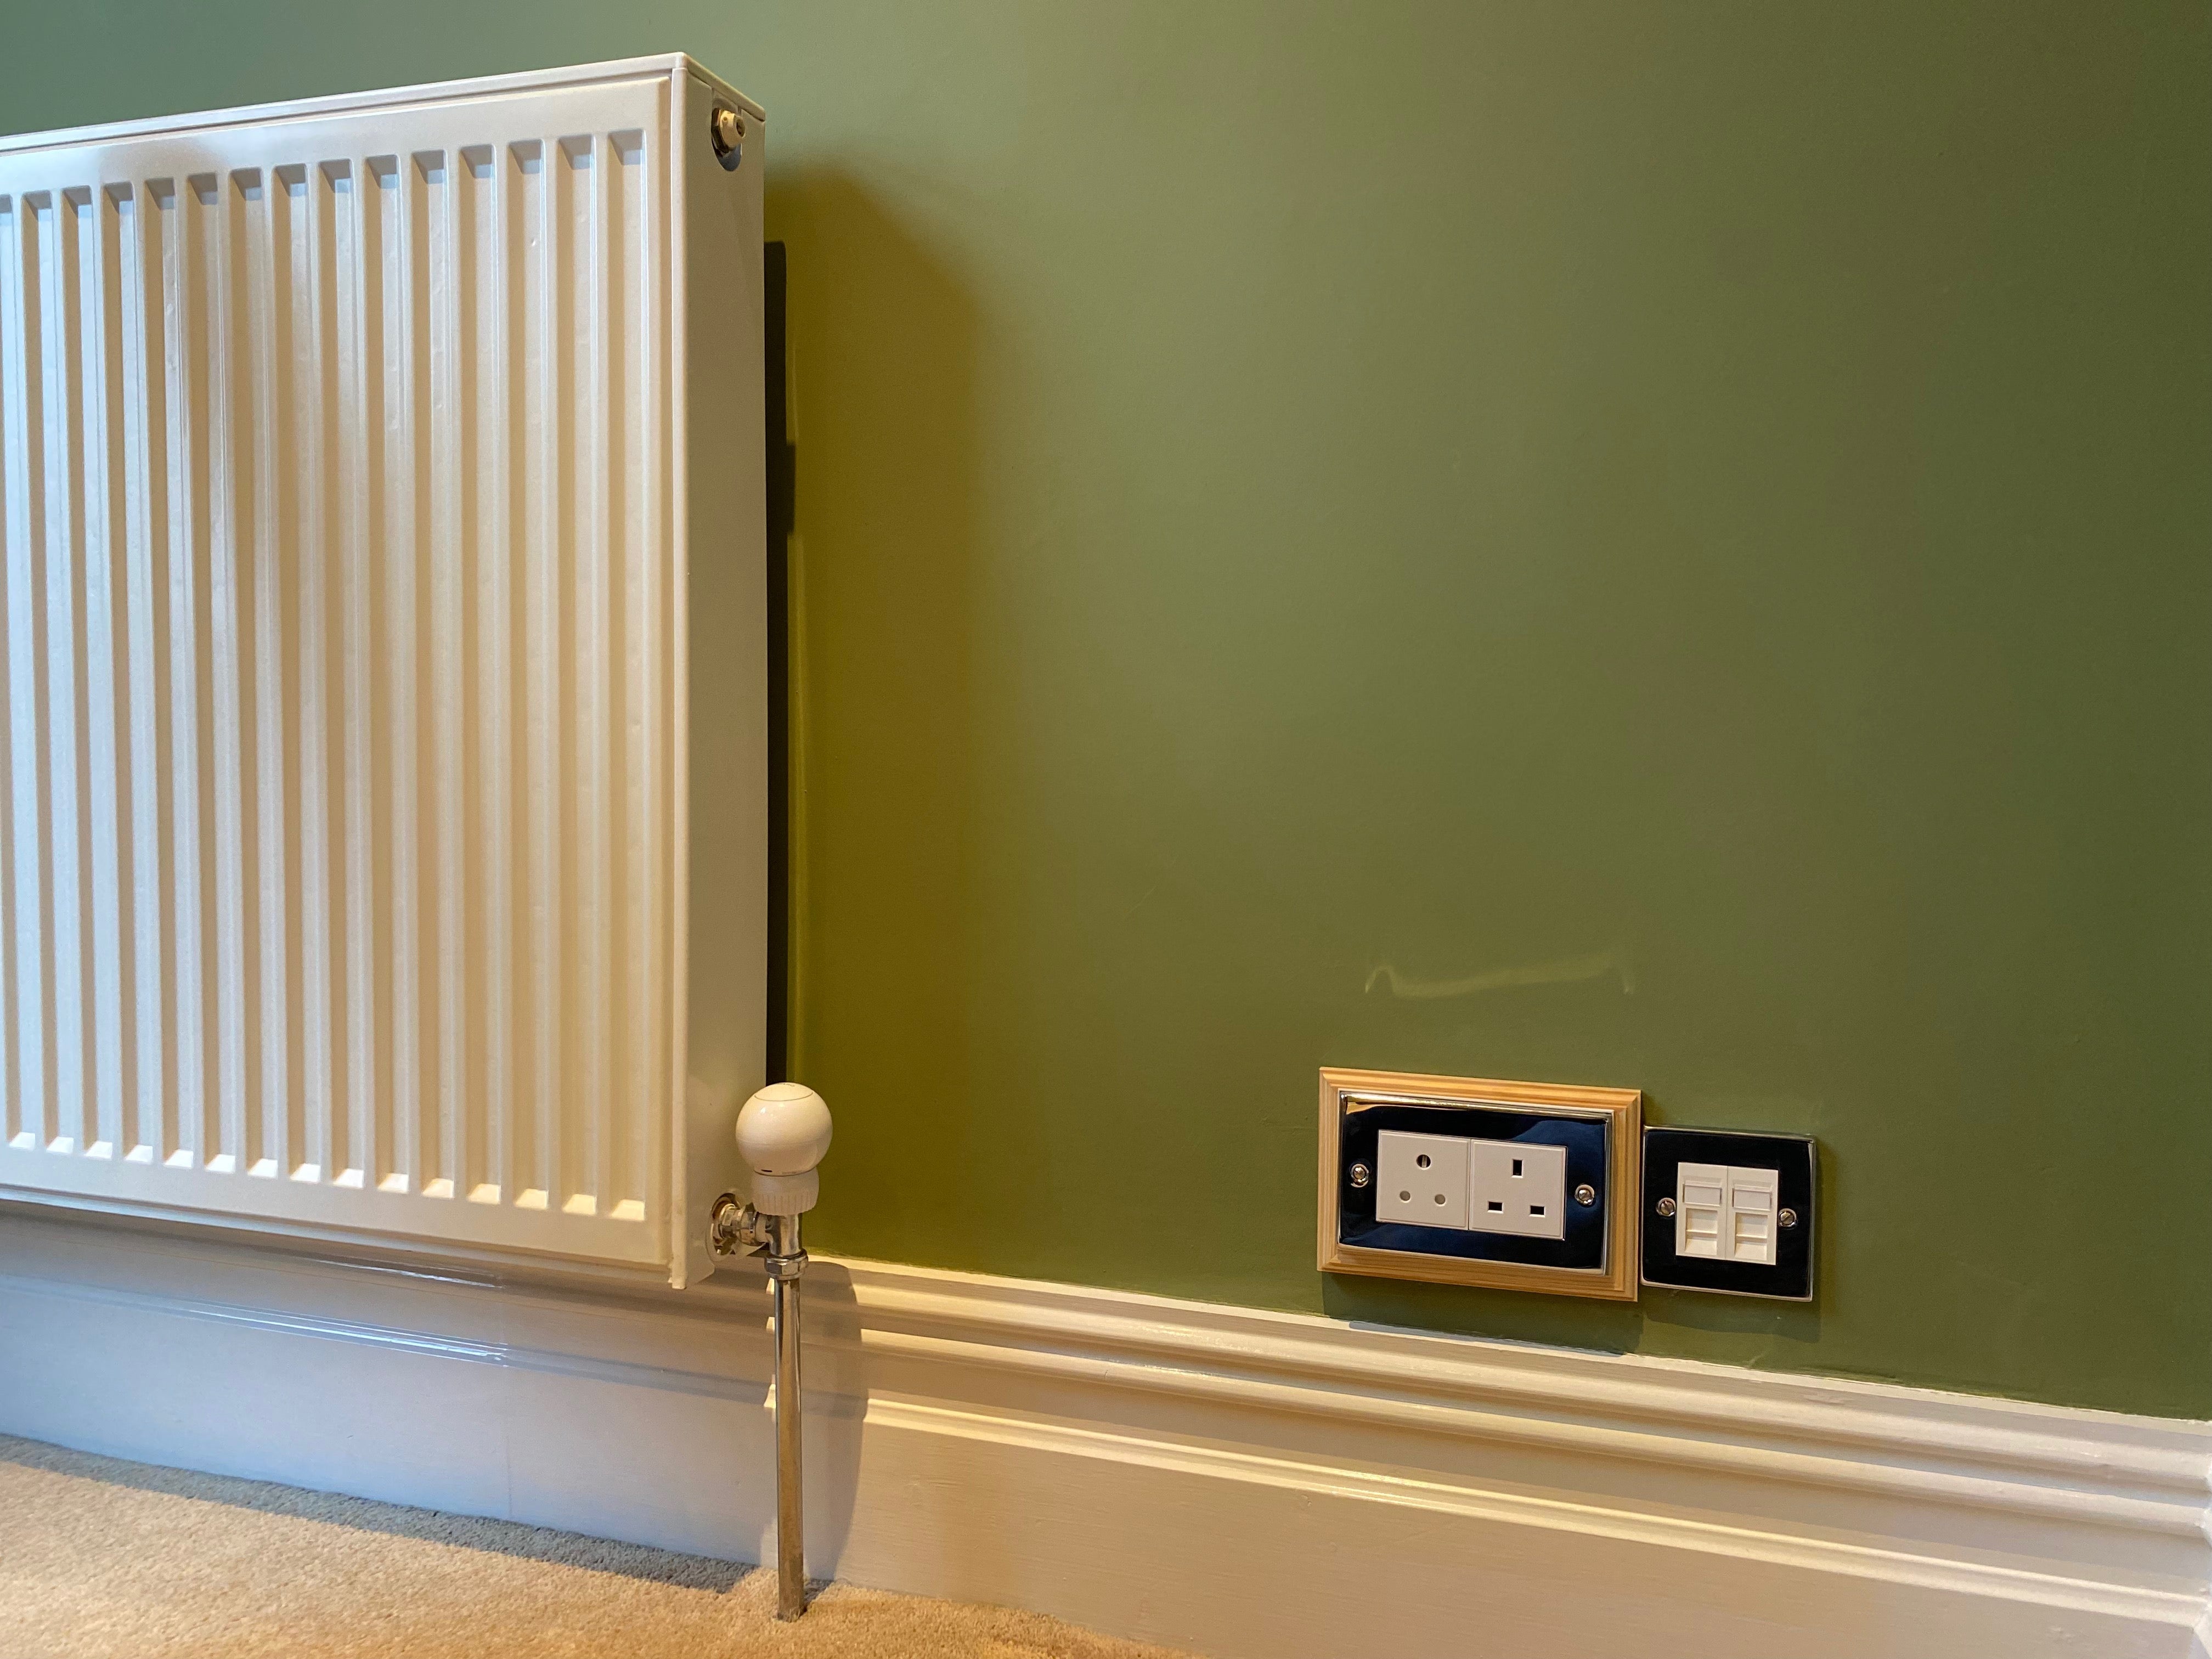 A radiator with a smart FIBARO Heat Controller on a carpeted floor against a green wall, beside a plug socket.